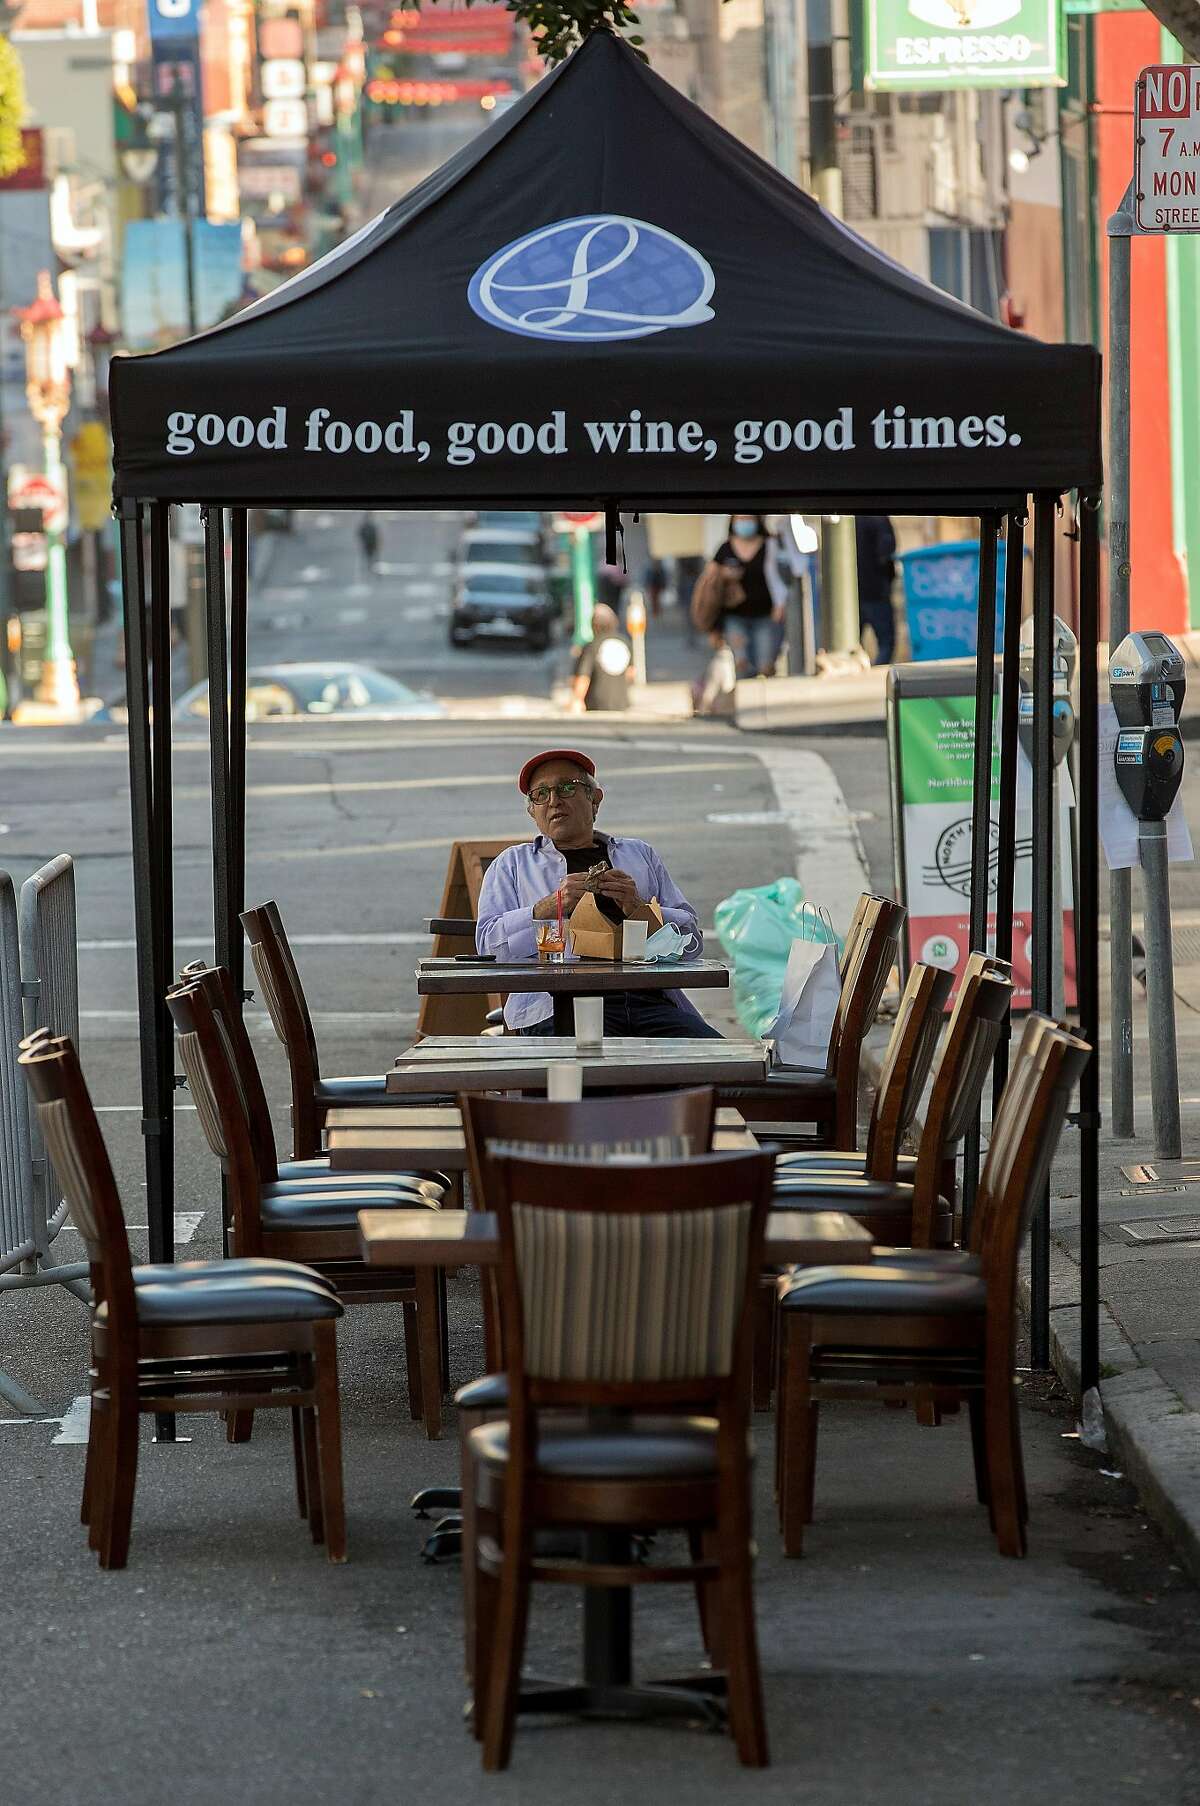 Louis Samuels has dinner at Ideale on Grant Street on outdoor seating in San Francisco, Calif., on Tuesday, June 16, 2020. The transitional post-shelter in place phase of landscape of San Francisco dining establishments is starting. Eateries try to stir back into action, but with a burden of constraints of protecting their customers. Several places on Belden Place are coming back with spaced outdoor tables, and several places on Green Street between Grant and Columbus are testing the waters as well with new dining in the street.